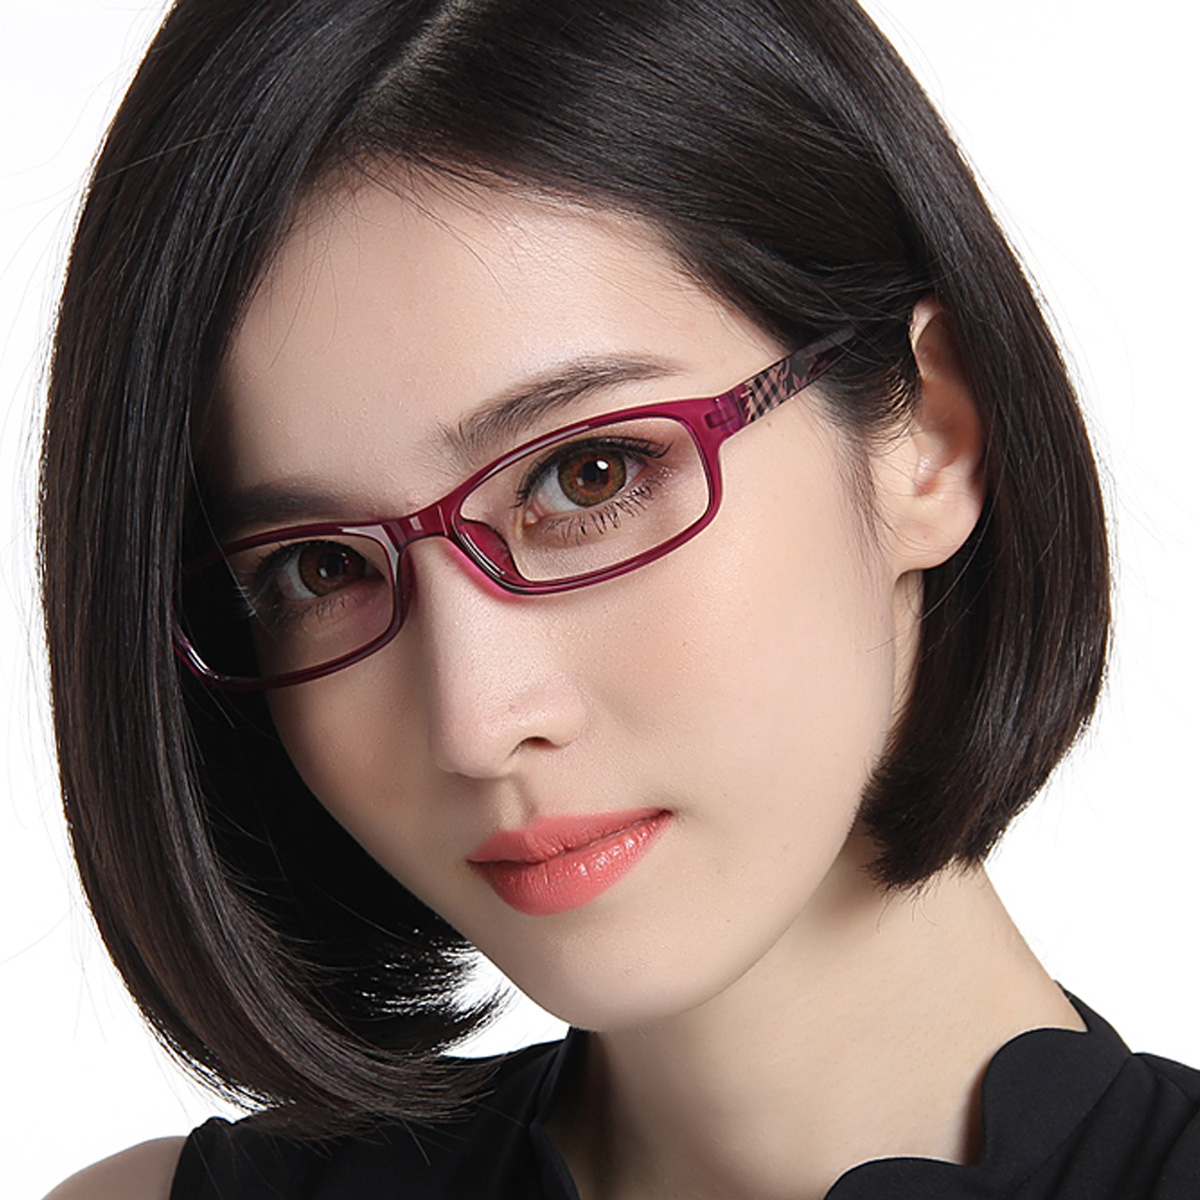 Glasses chinese free porn compilations